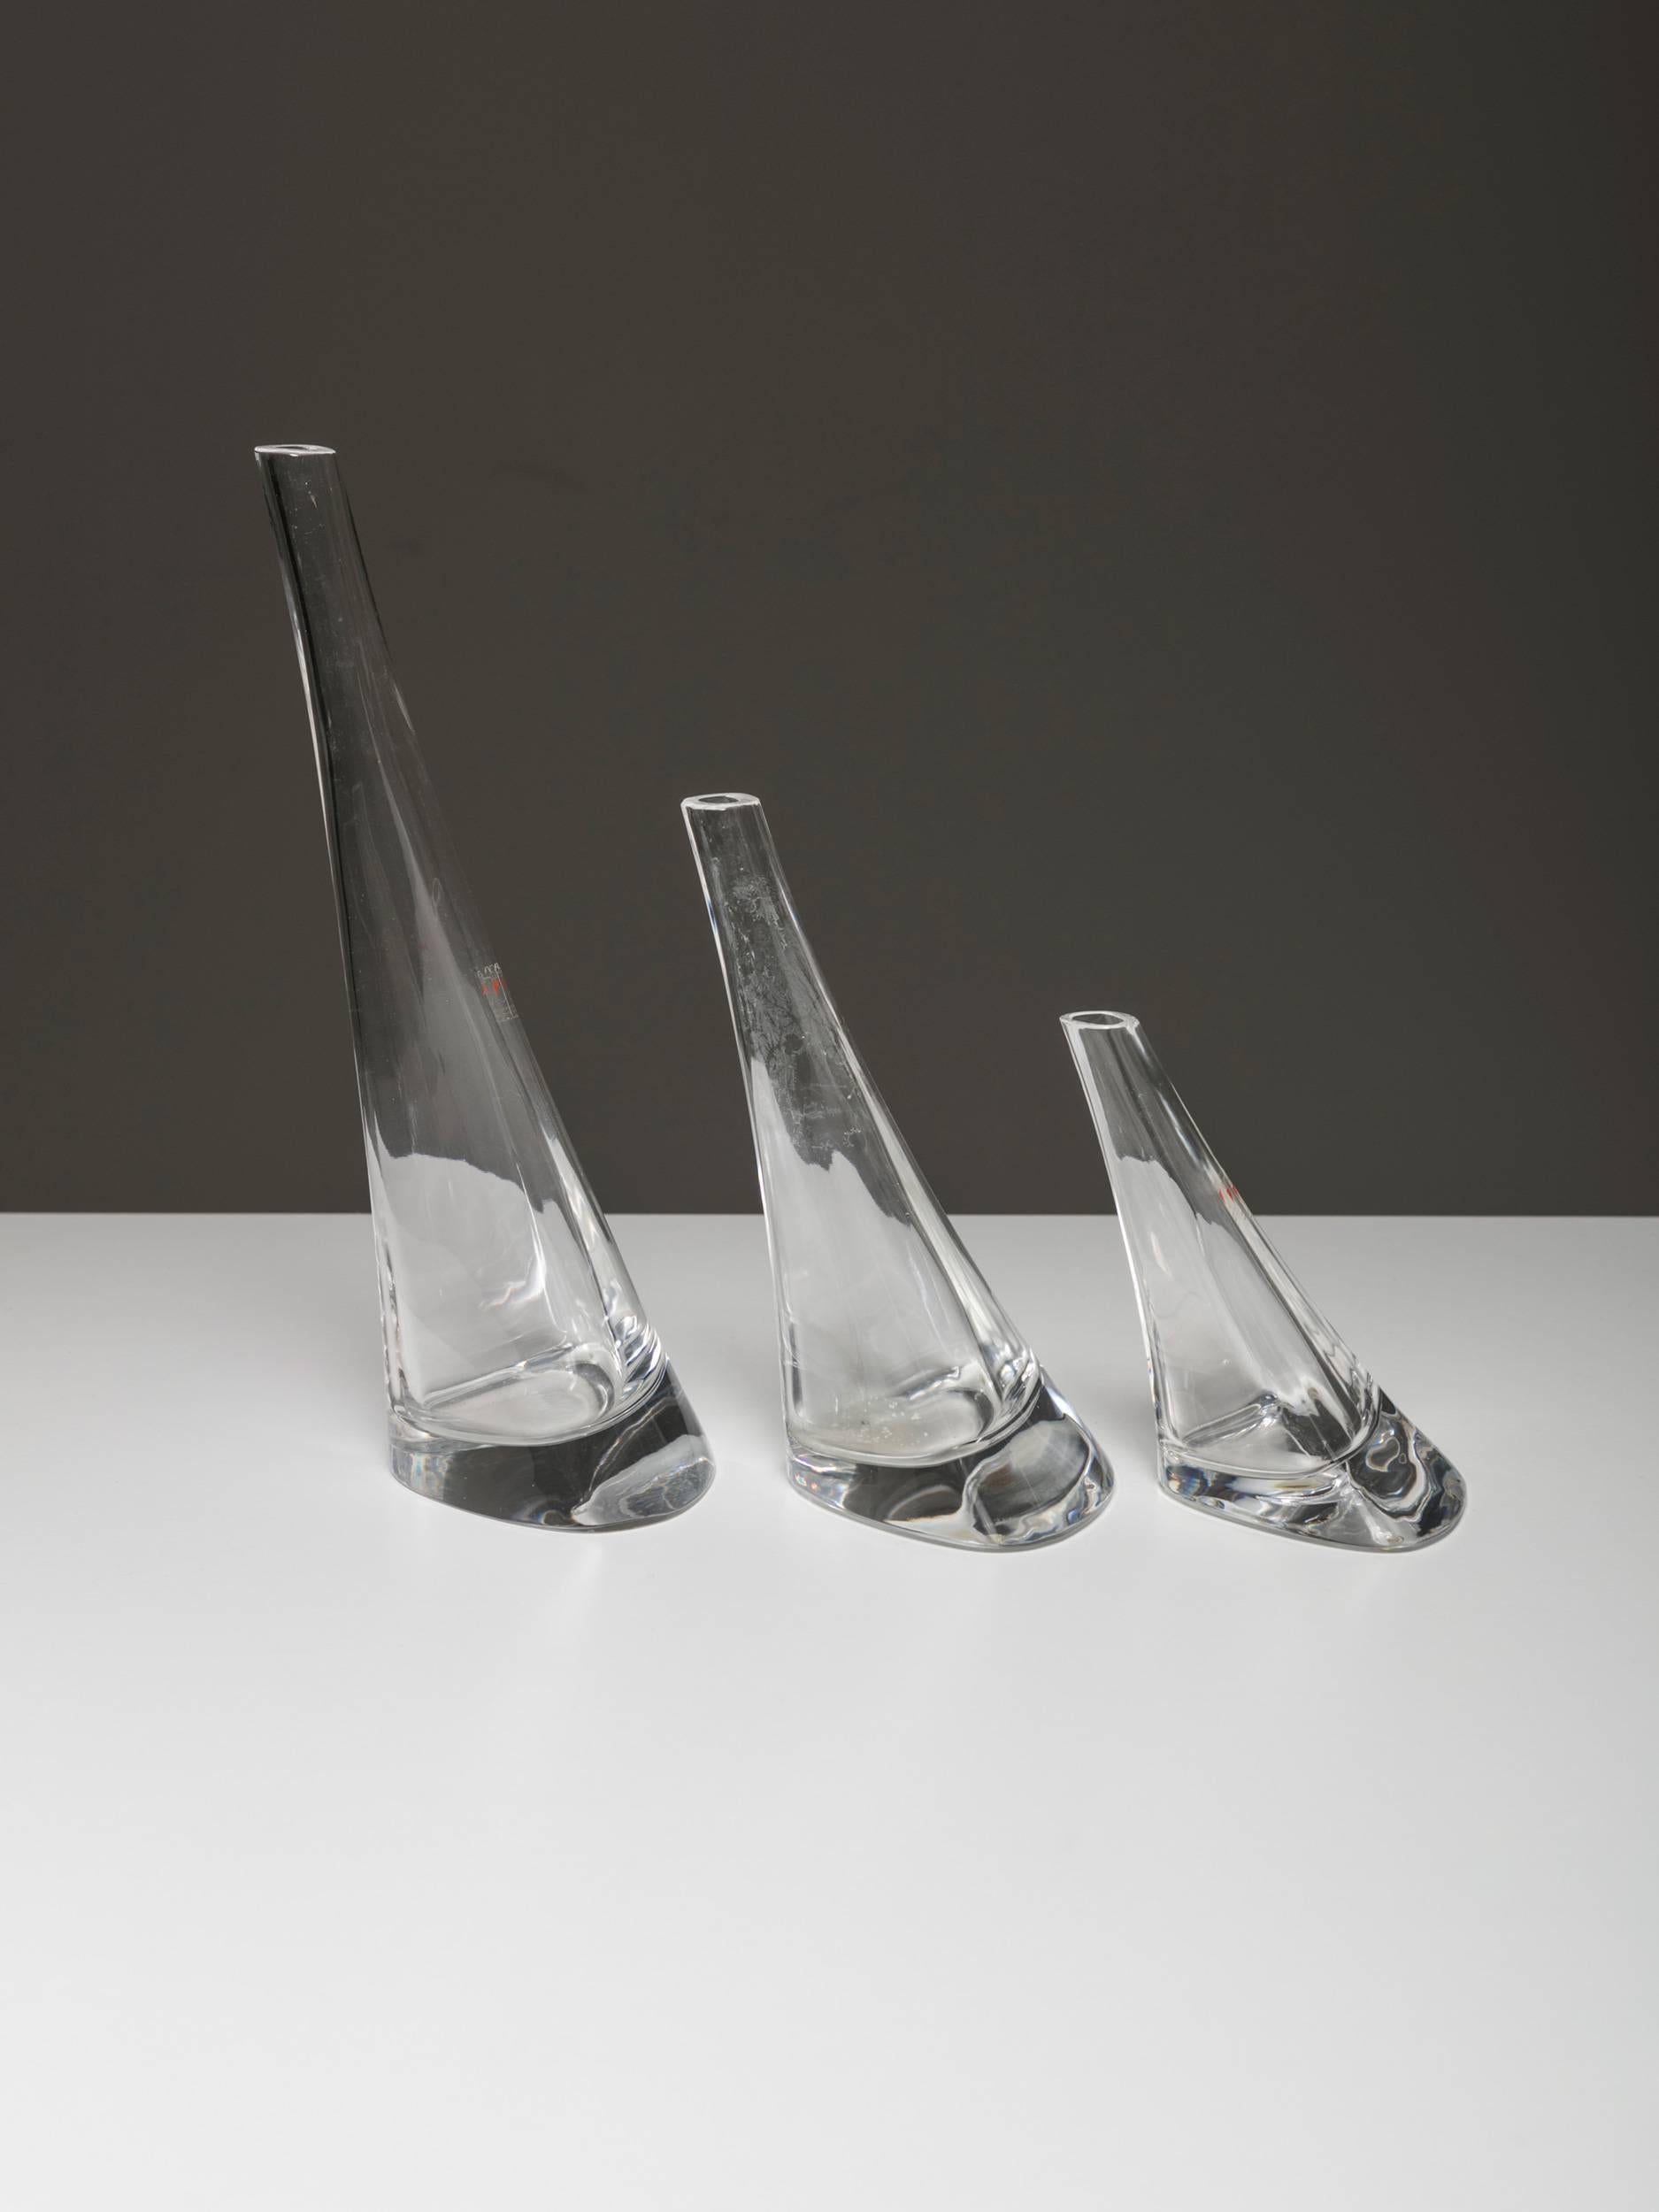 Set of four crystal vases by Angelo Mangiarotti for Cristlleria Colle.
Three soliflower vases and a larger piece.
Part of an extensive collection designed in the 1980s by Mangiarotti for this Tuscan manufacturer.